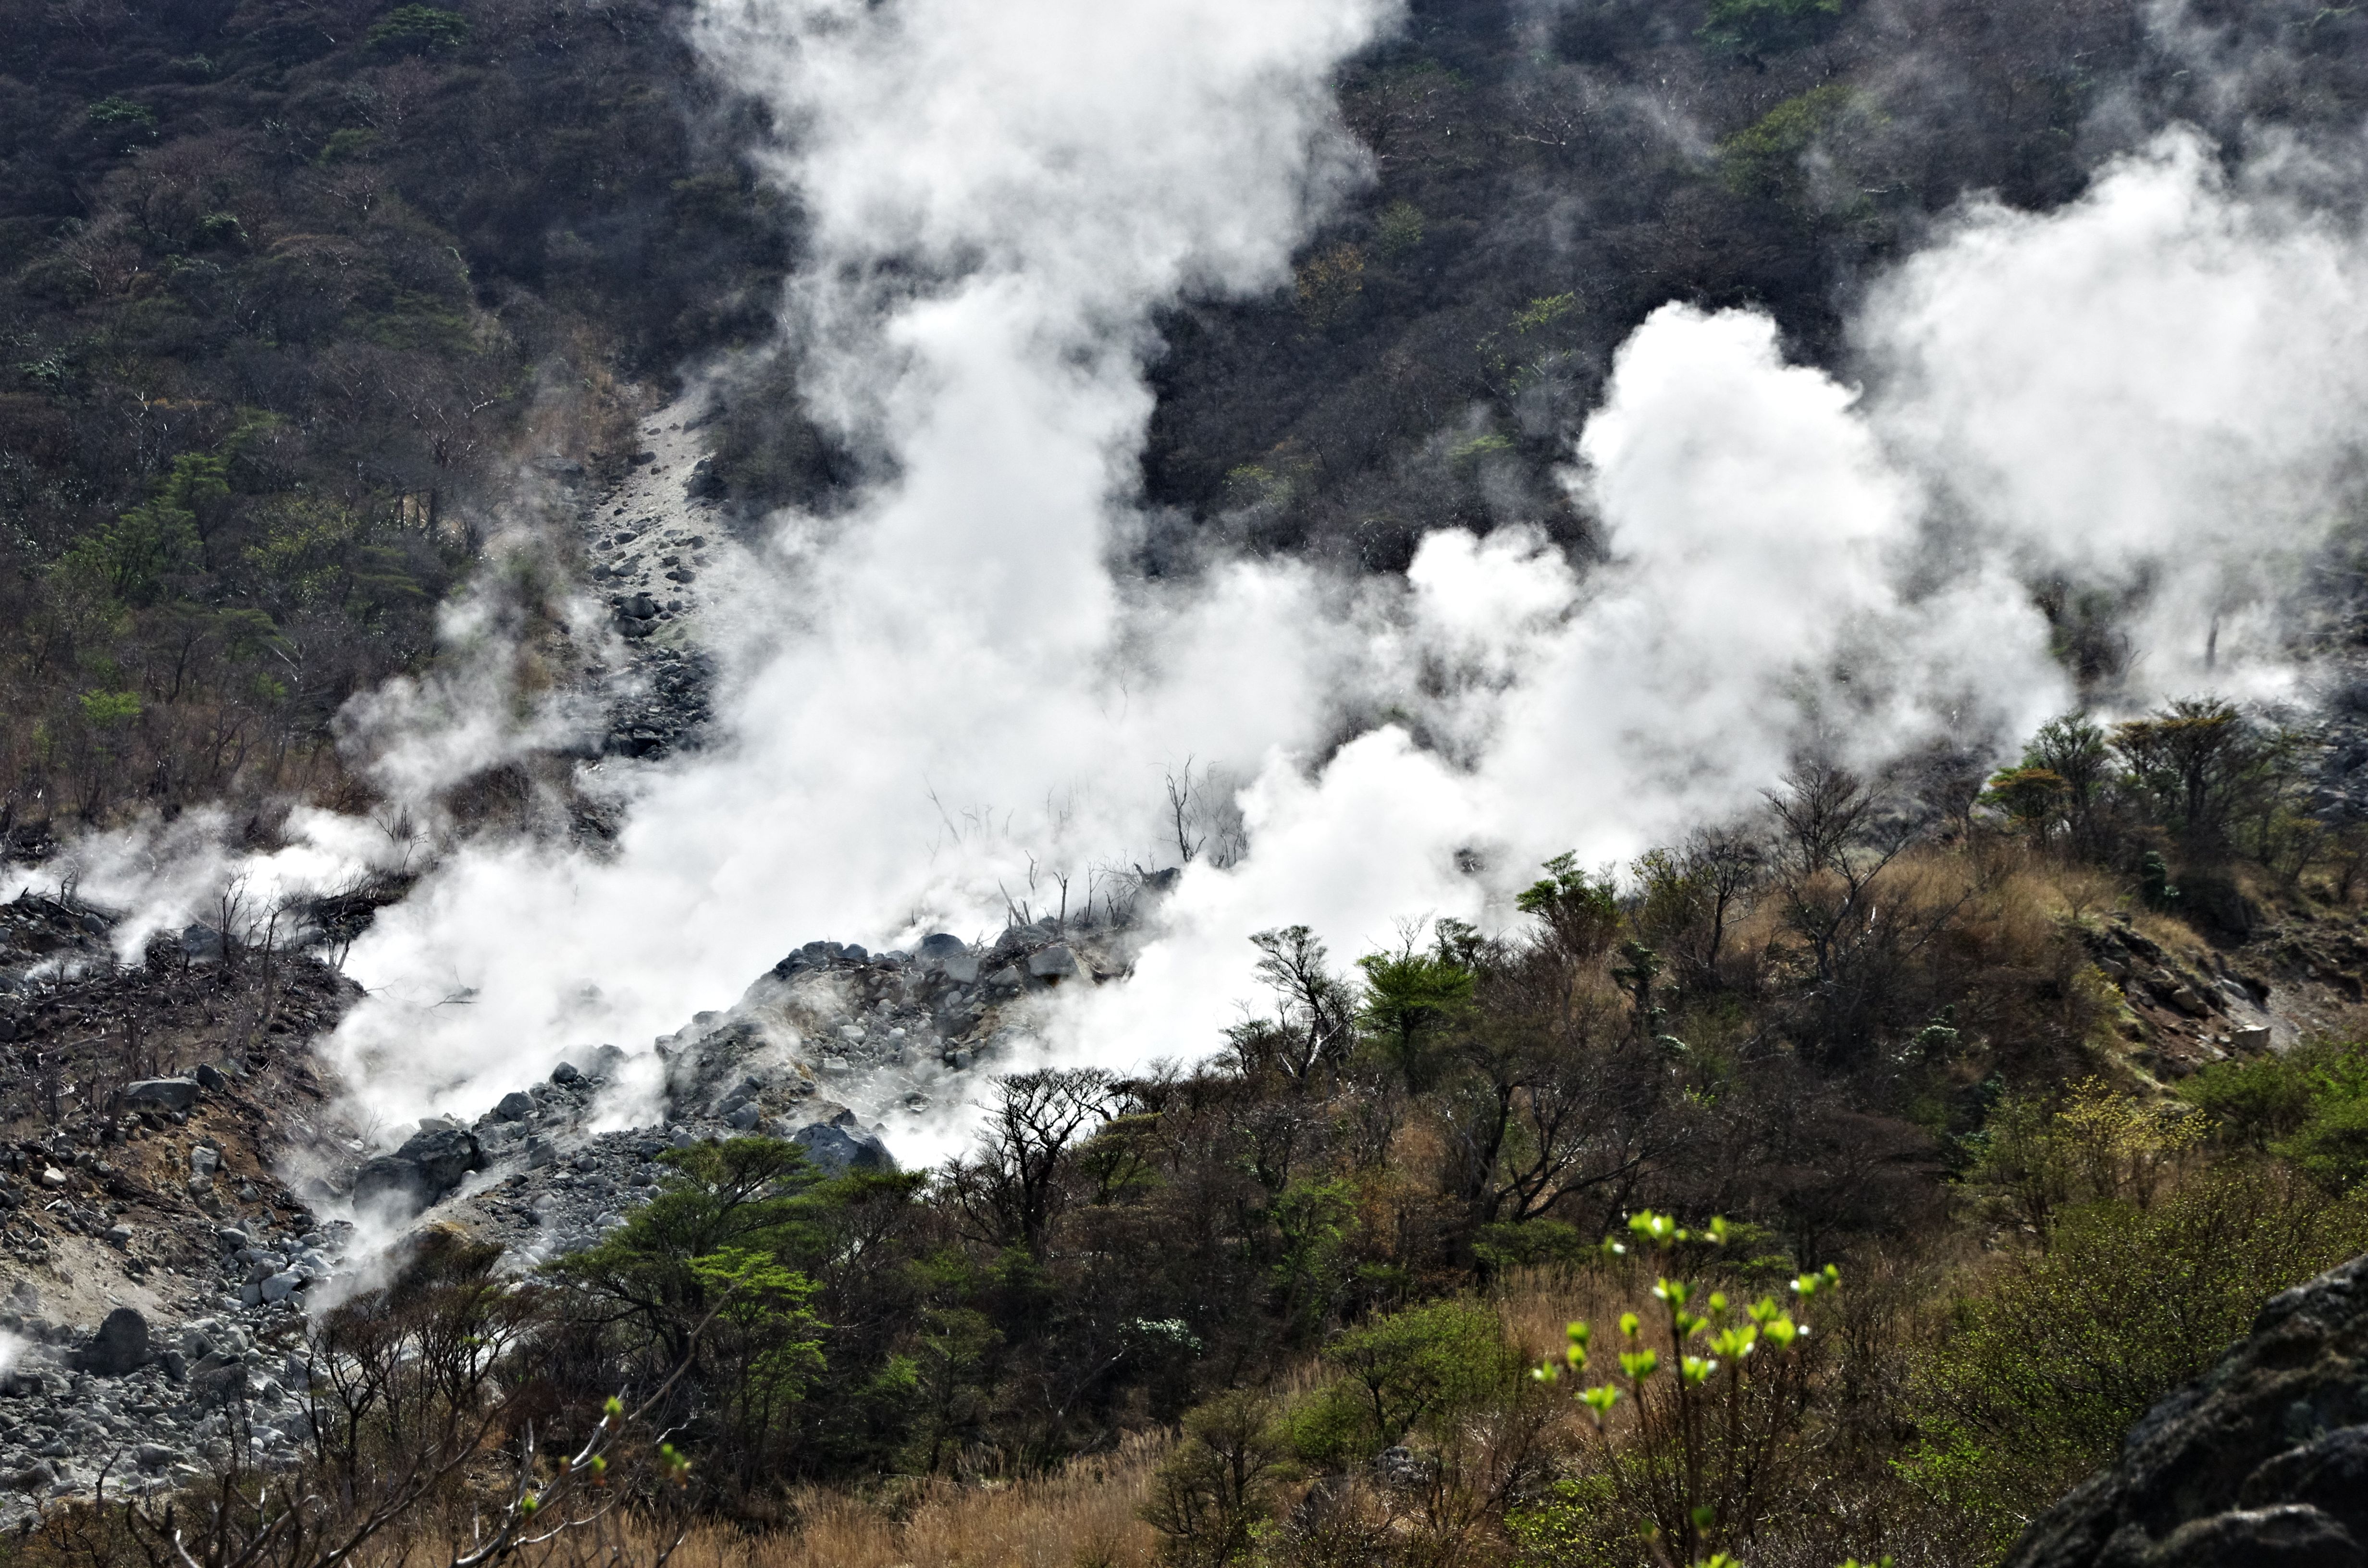 Steam vigorously emitting from Oowakudani Valley, Hakone (2015-04-24). It was probably the sign of unusual volcanic activities that occurred a week later. 大涌谷から涌立つ水蒸気, 箱根。爆発1週間後，この時点で既に兆候があったのかも知れない。